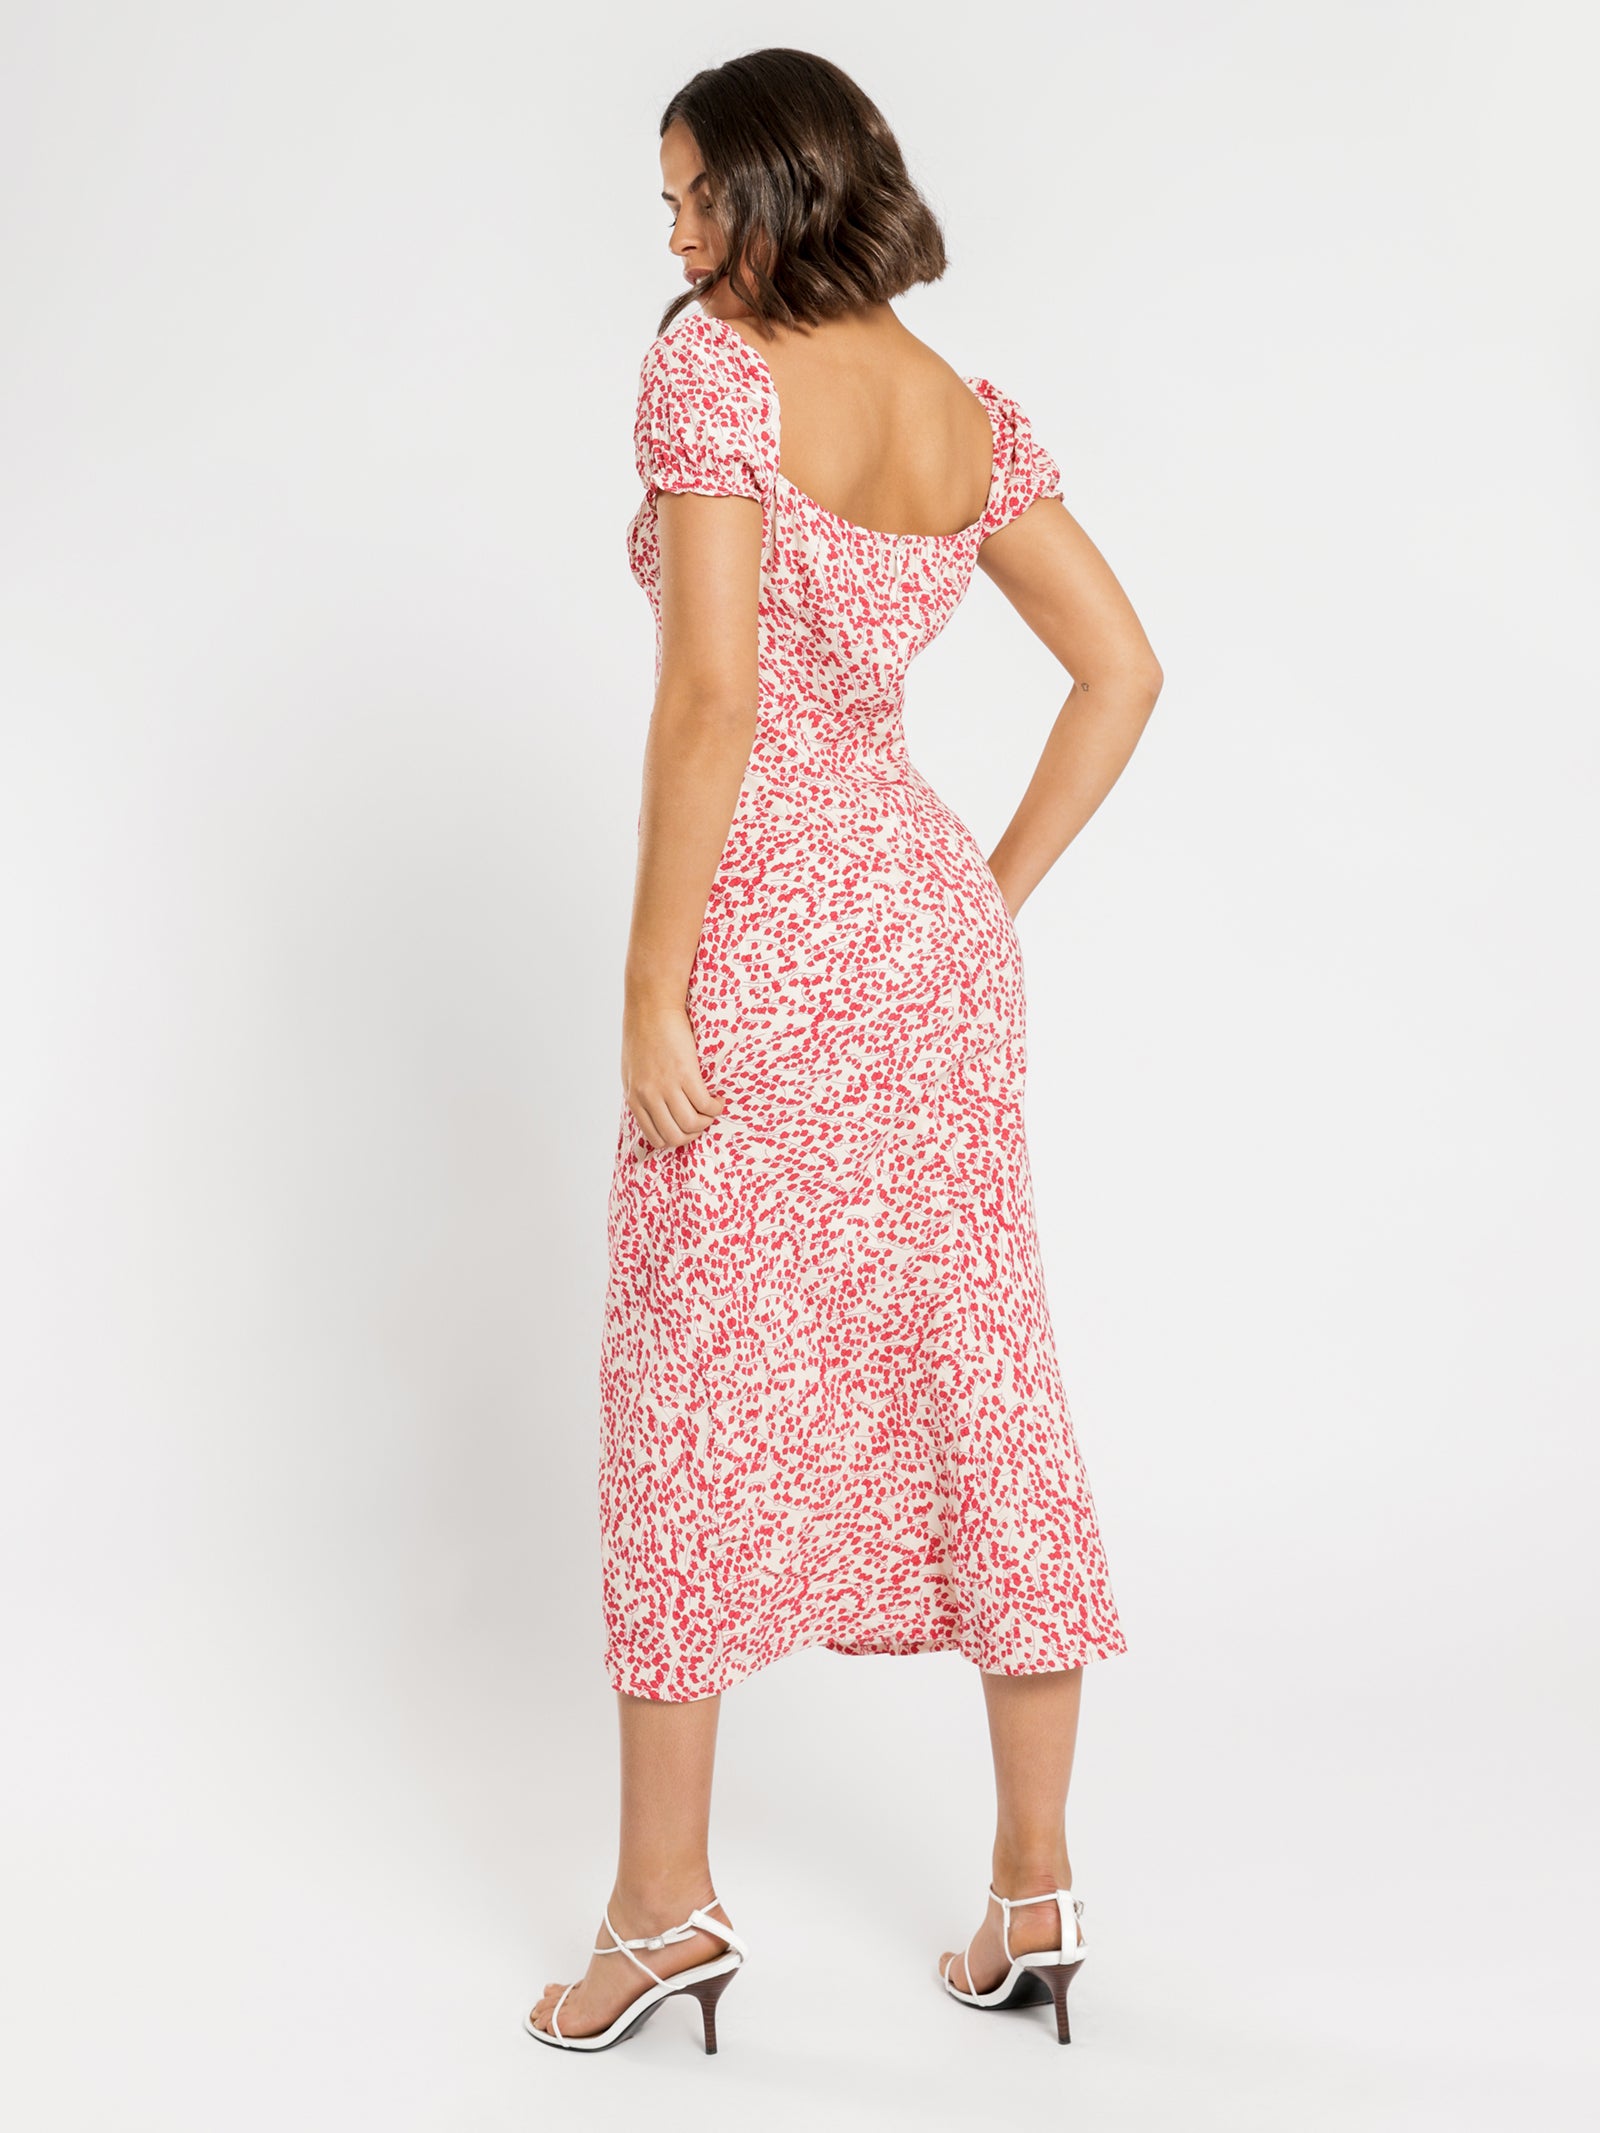 Neve Floral Midi Dress in Red & White